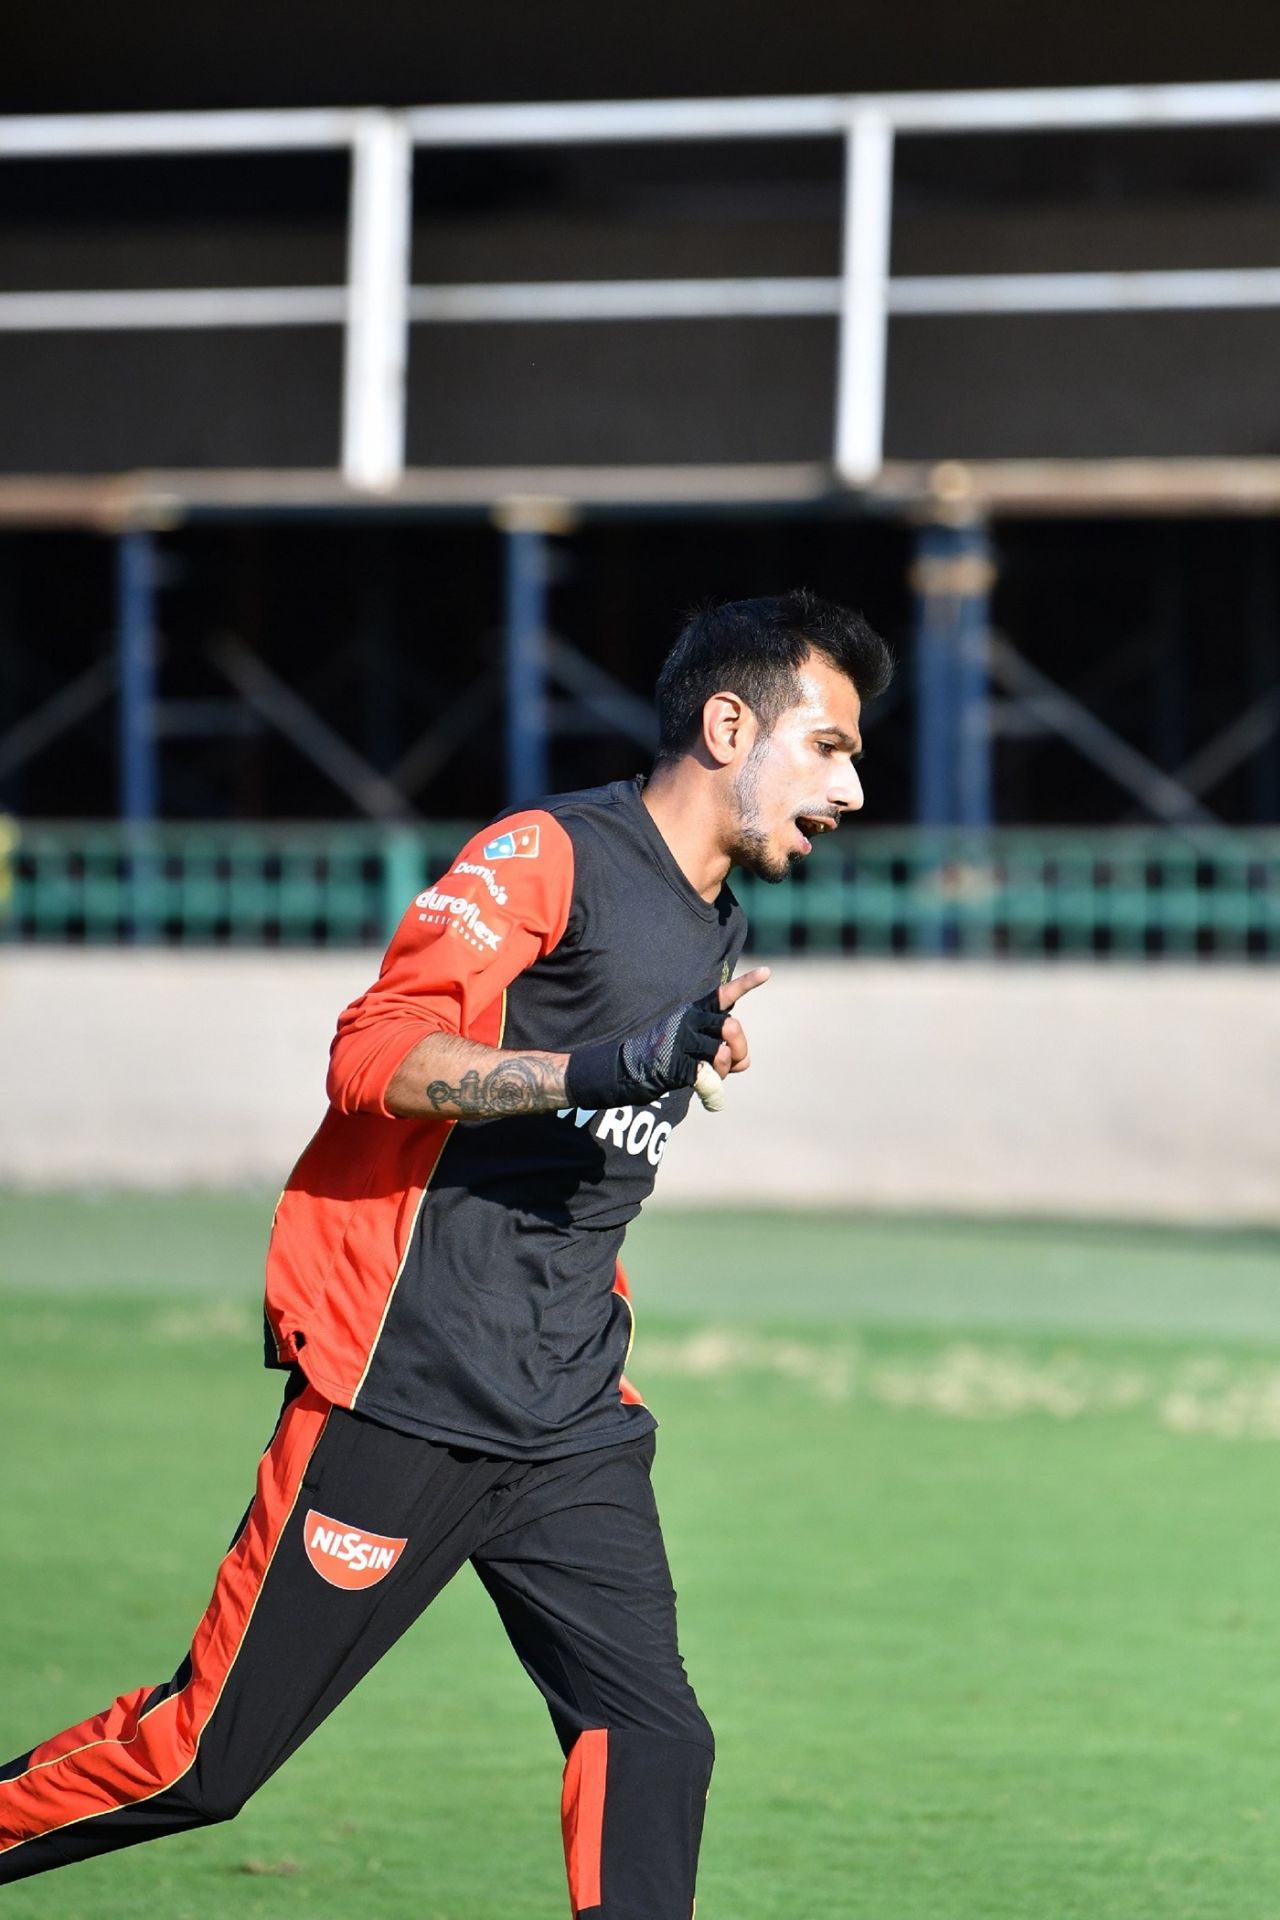 Yuzvendra Chahal during a training session with RCB, IPL 2019, Bengaluru, March 19, 2019